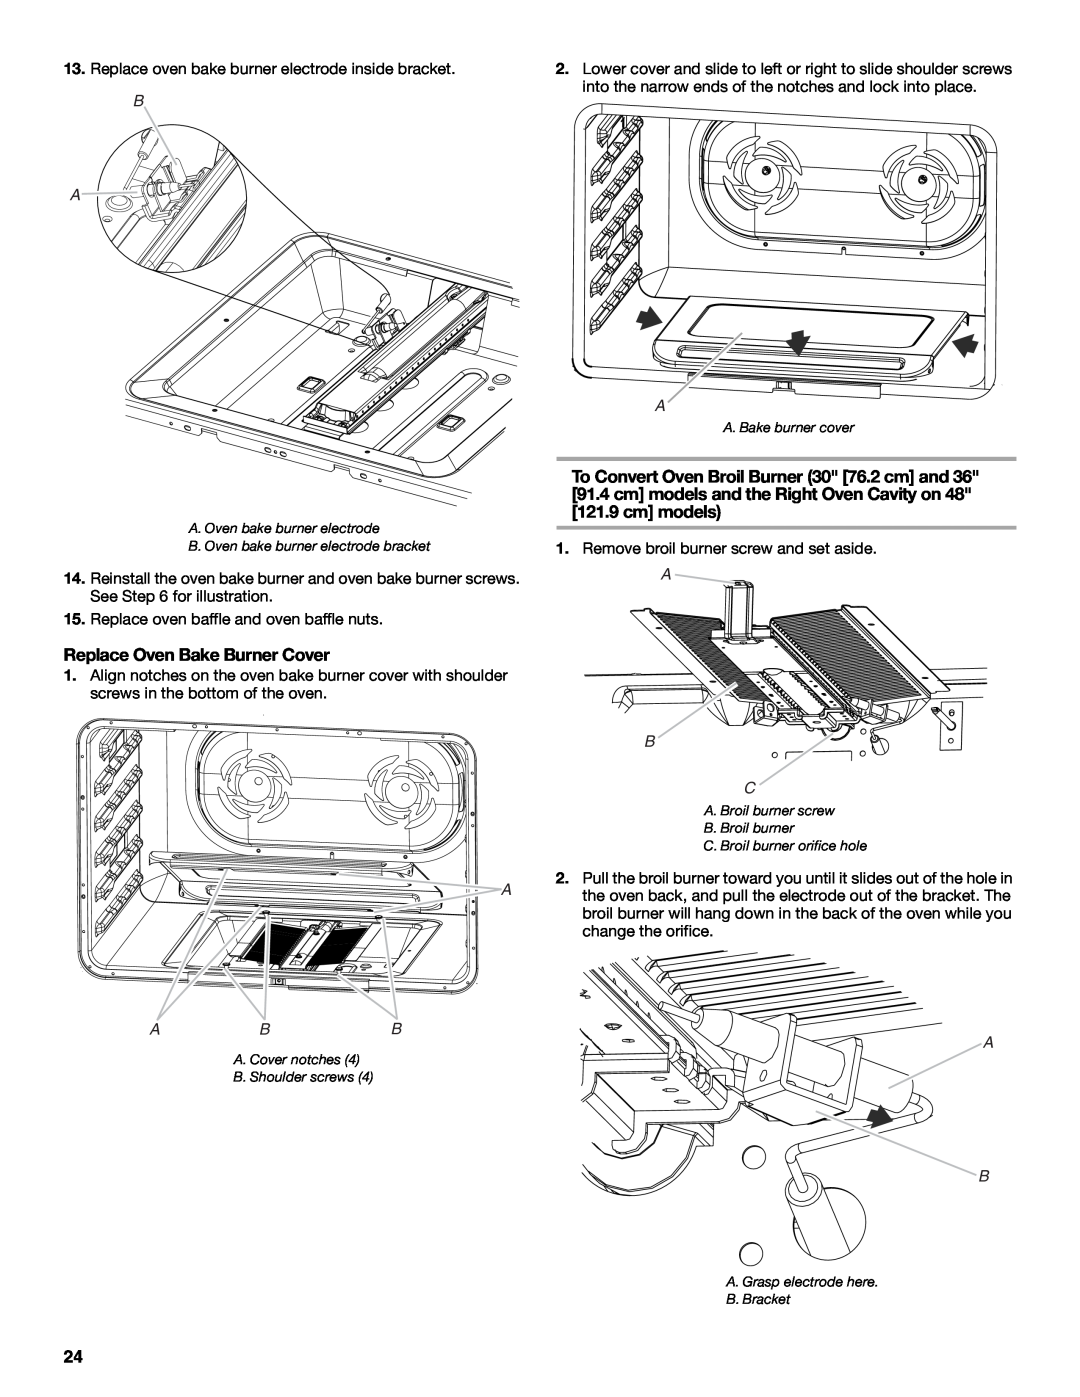 Jenn-Air W10394575A installation instructions Replace Oven Bake Burner Cover, A Abb, A B C 